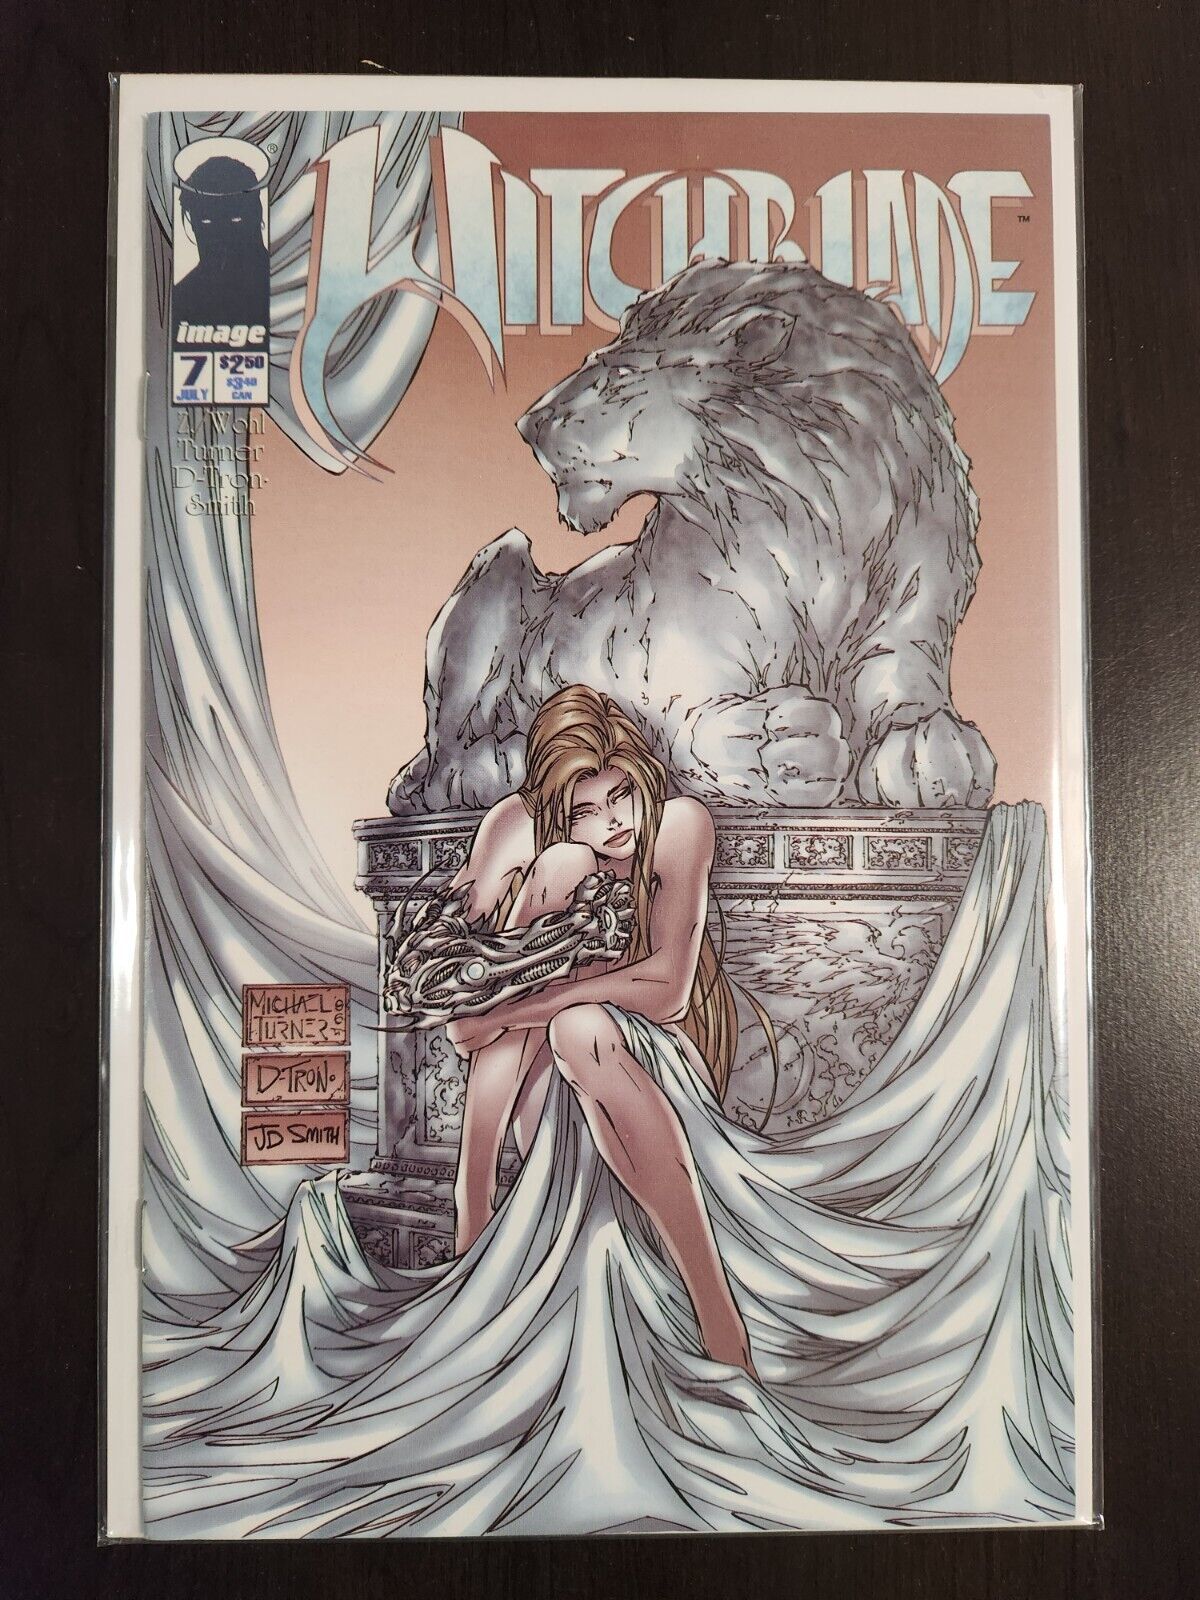 Witchblade #7 Early Michael Turner Cover Image Comics 1996 NM